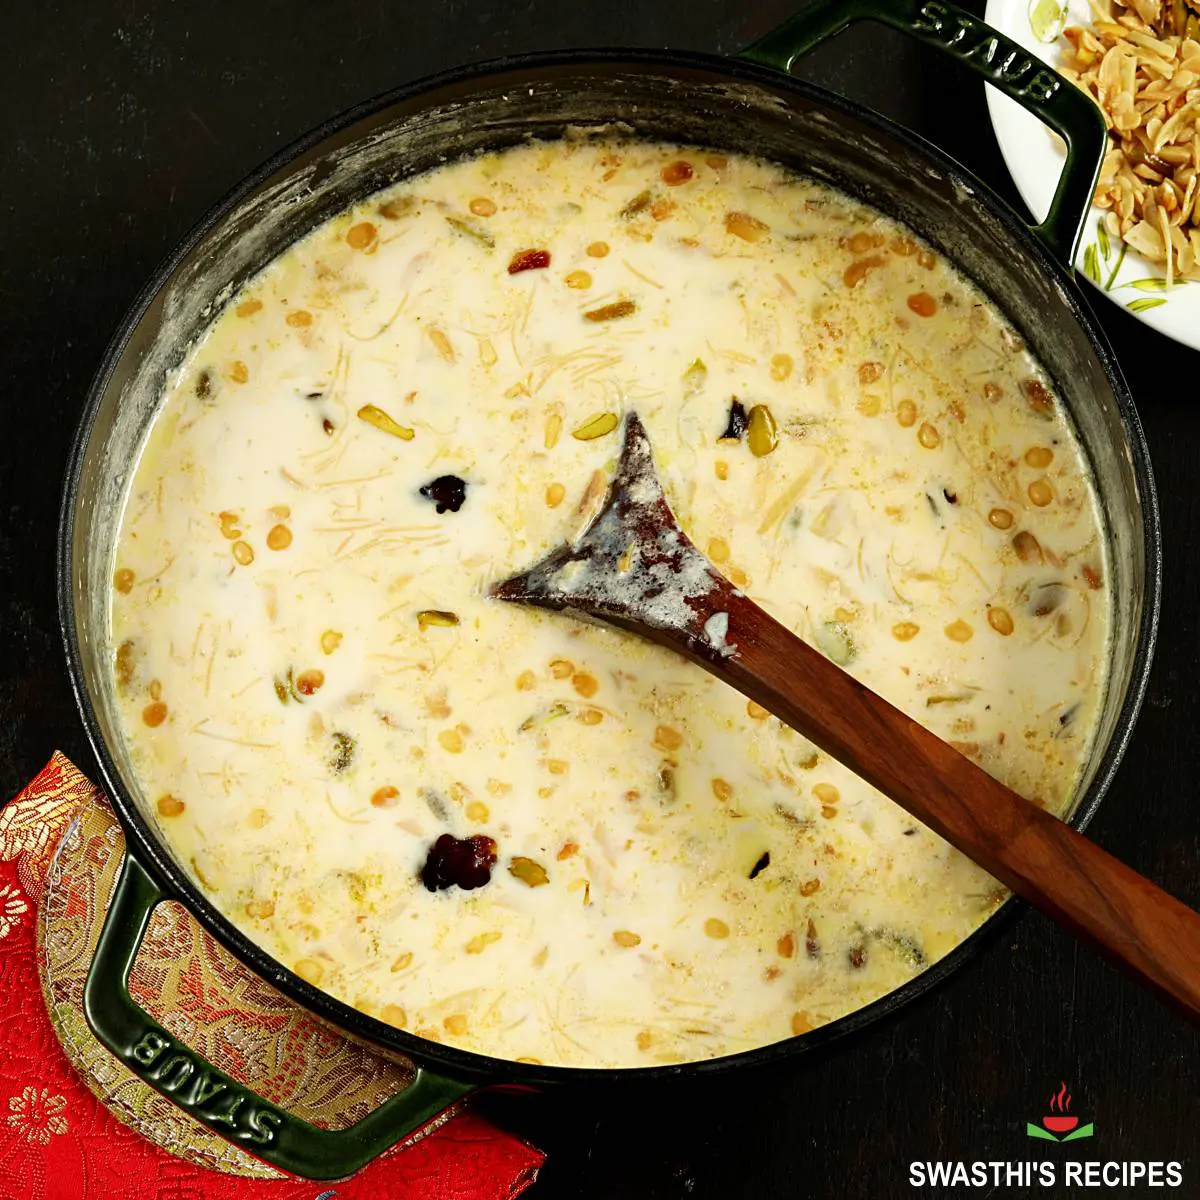 Sheer khurma made with vermicelli, sugar, milk and nuts